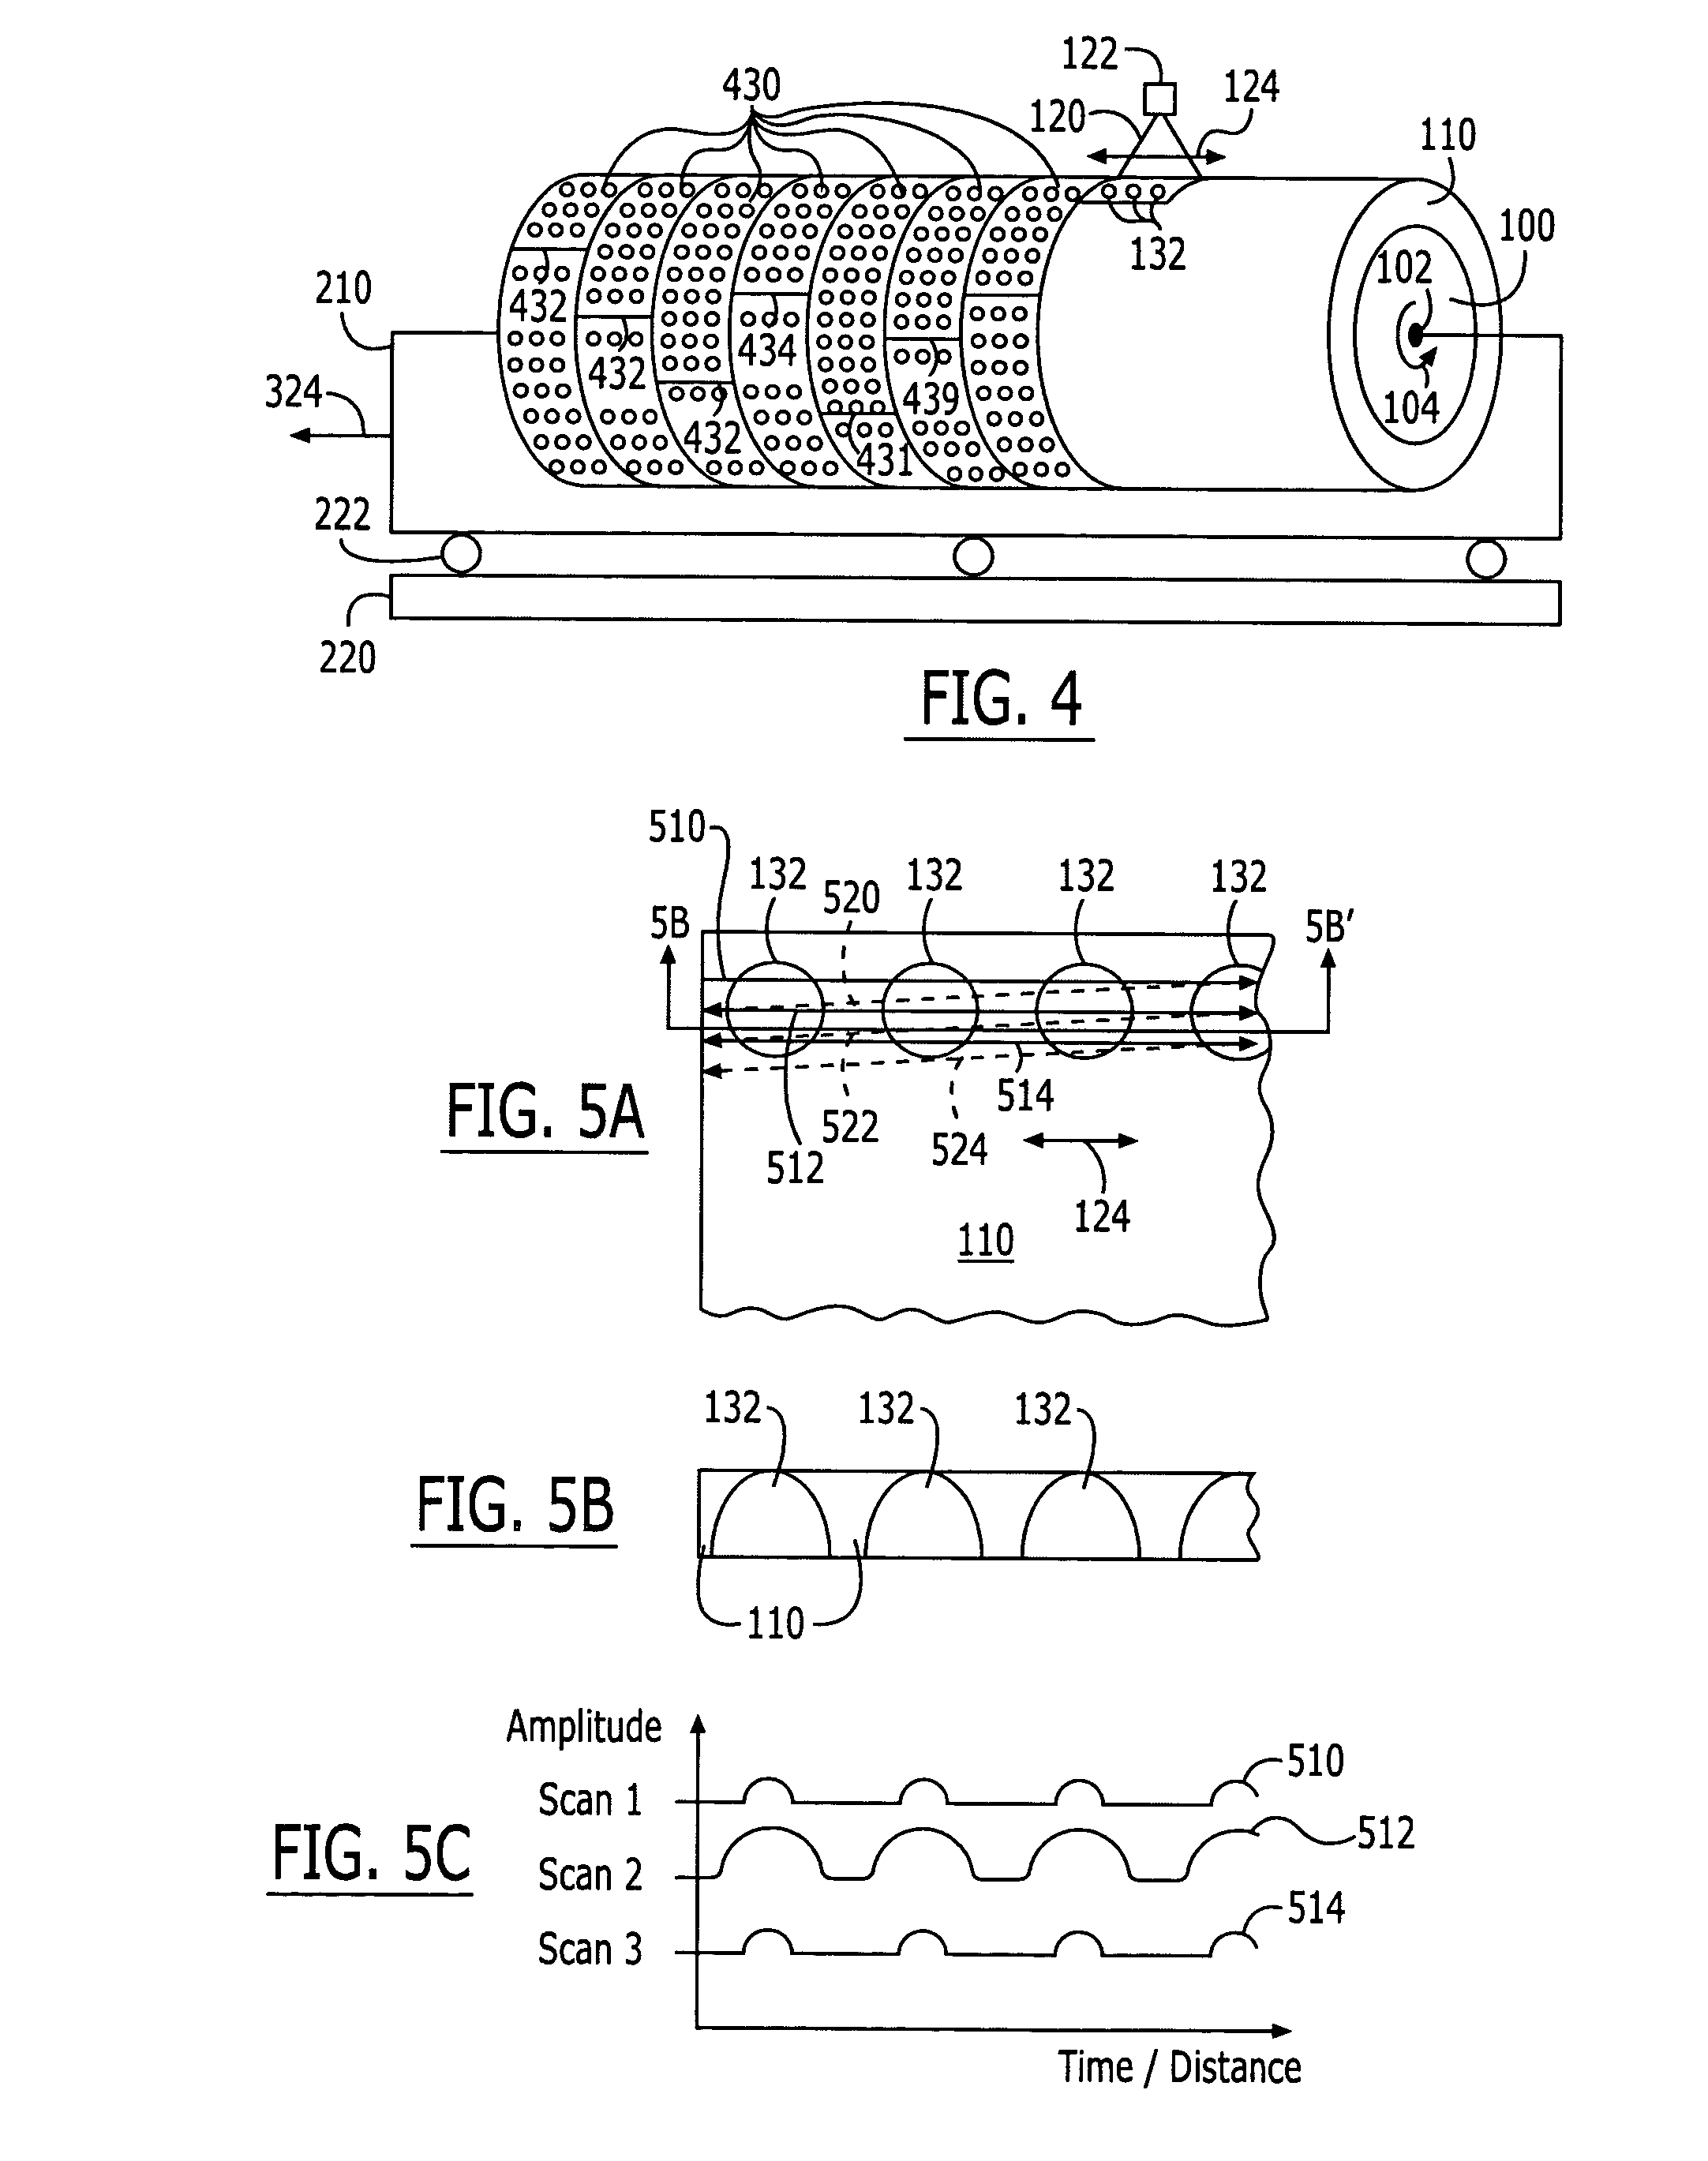 Methods for mastering microstructures through a substrate using negative photoresist